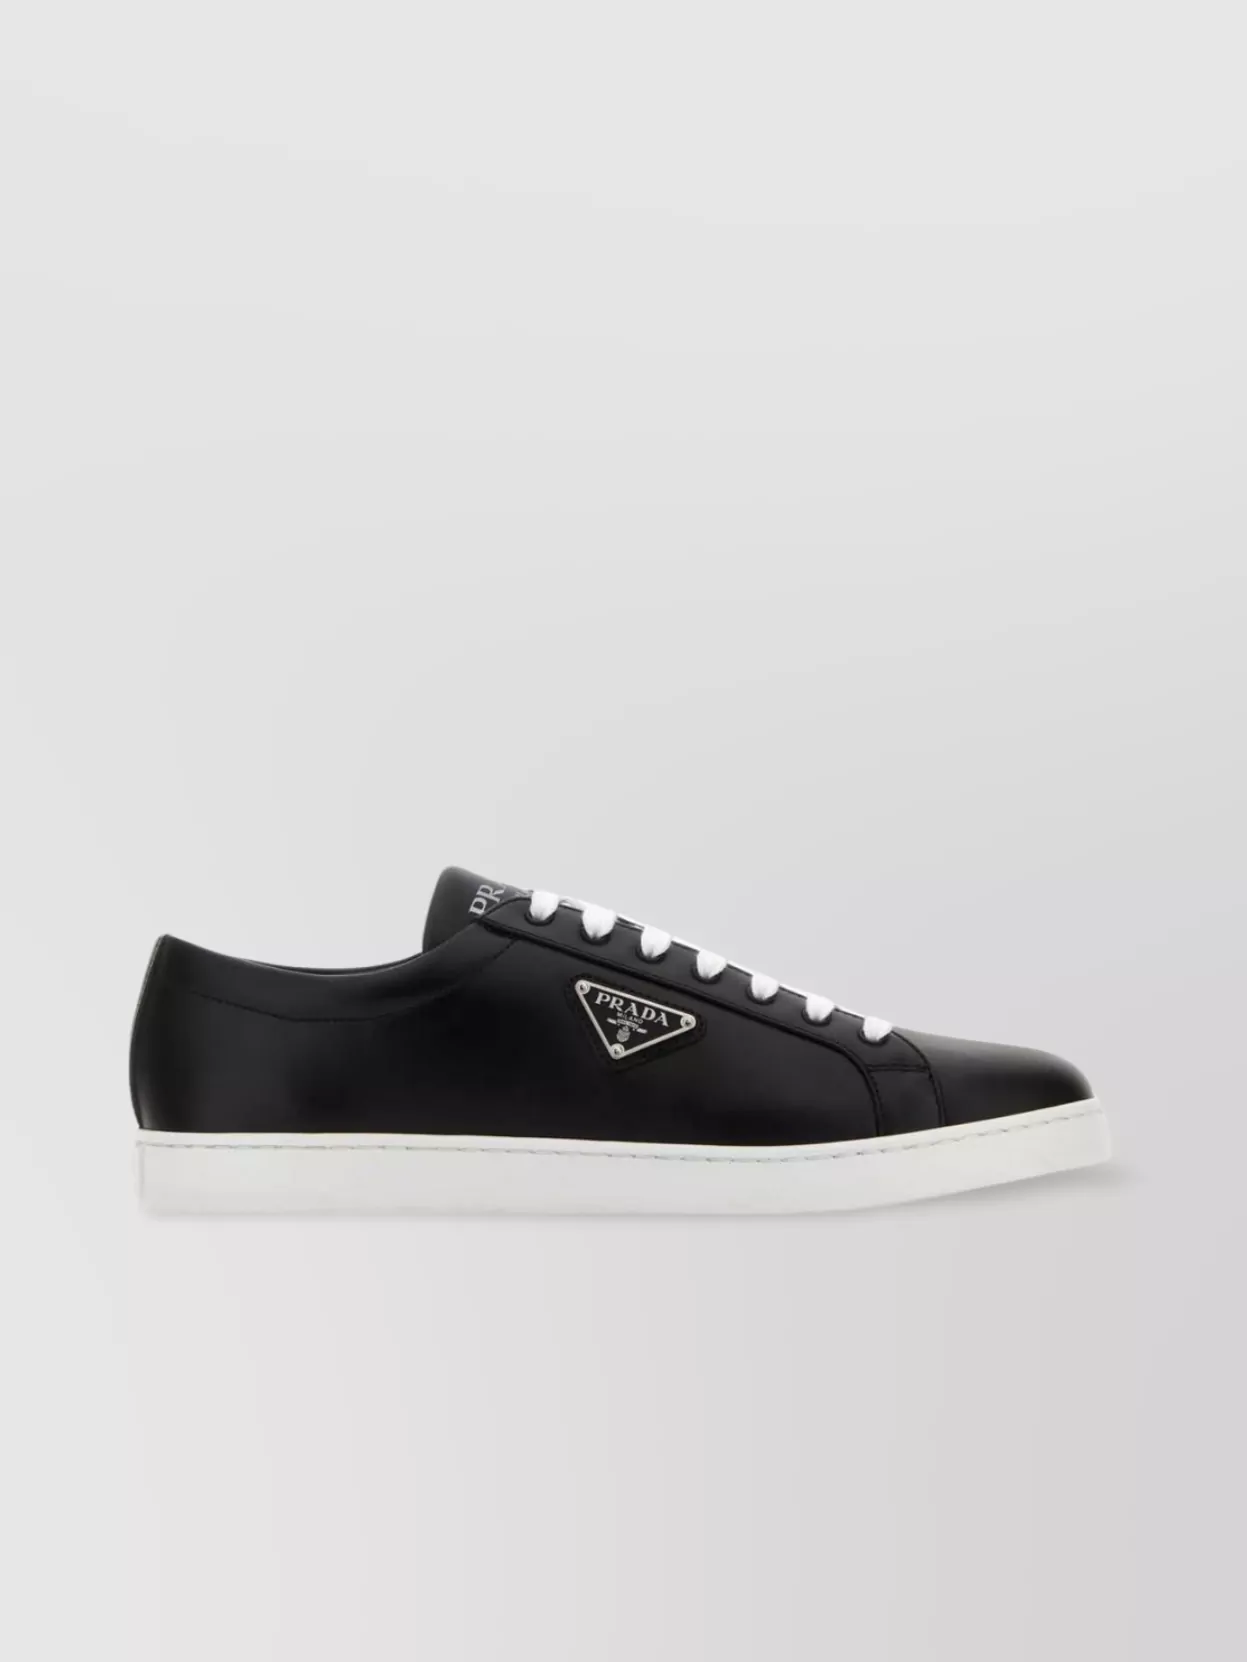 Prada Leather Sneakers Flat Sole Low-top Round Toe In Black